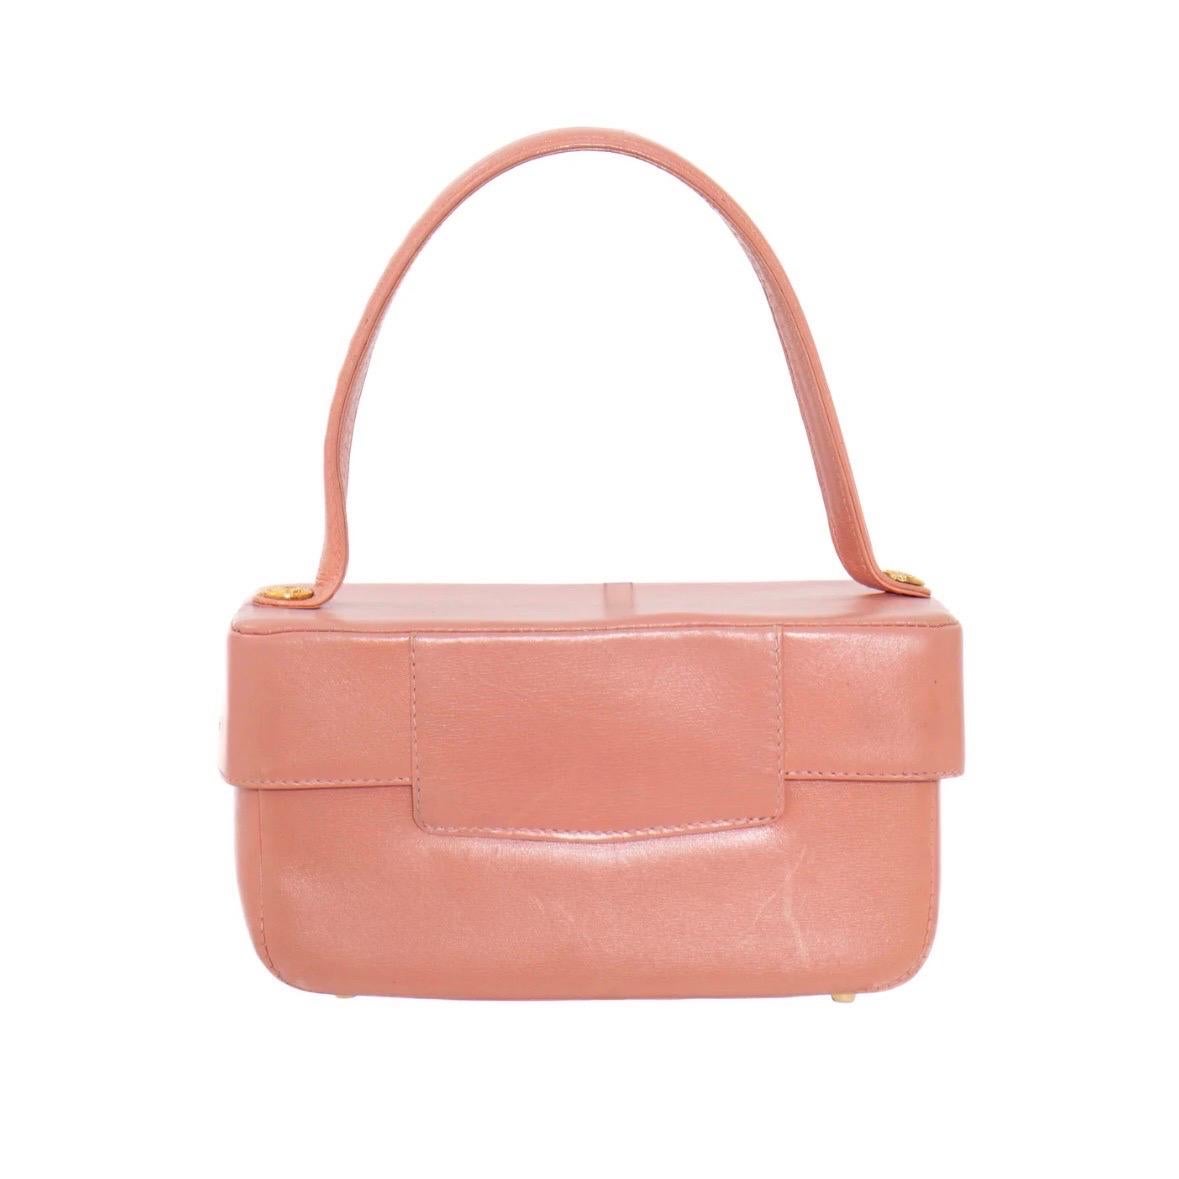 Top handle bag by Gianni Versace
Circa 1990's
Box shape
Pink leather
Gold-tone hardware
Lock front closure 
Leather top handle with Medusa head buttons
One slip pocket
Five base feet 
Lock not included
Condition: good; some creasing and scuffs.